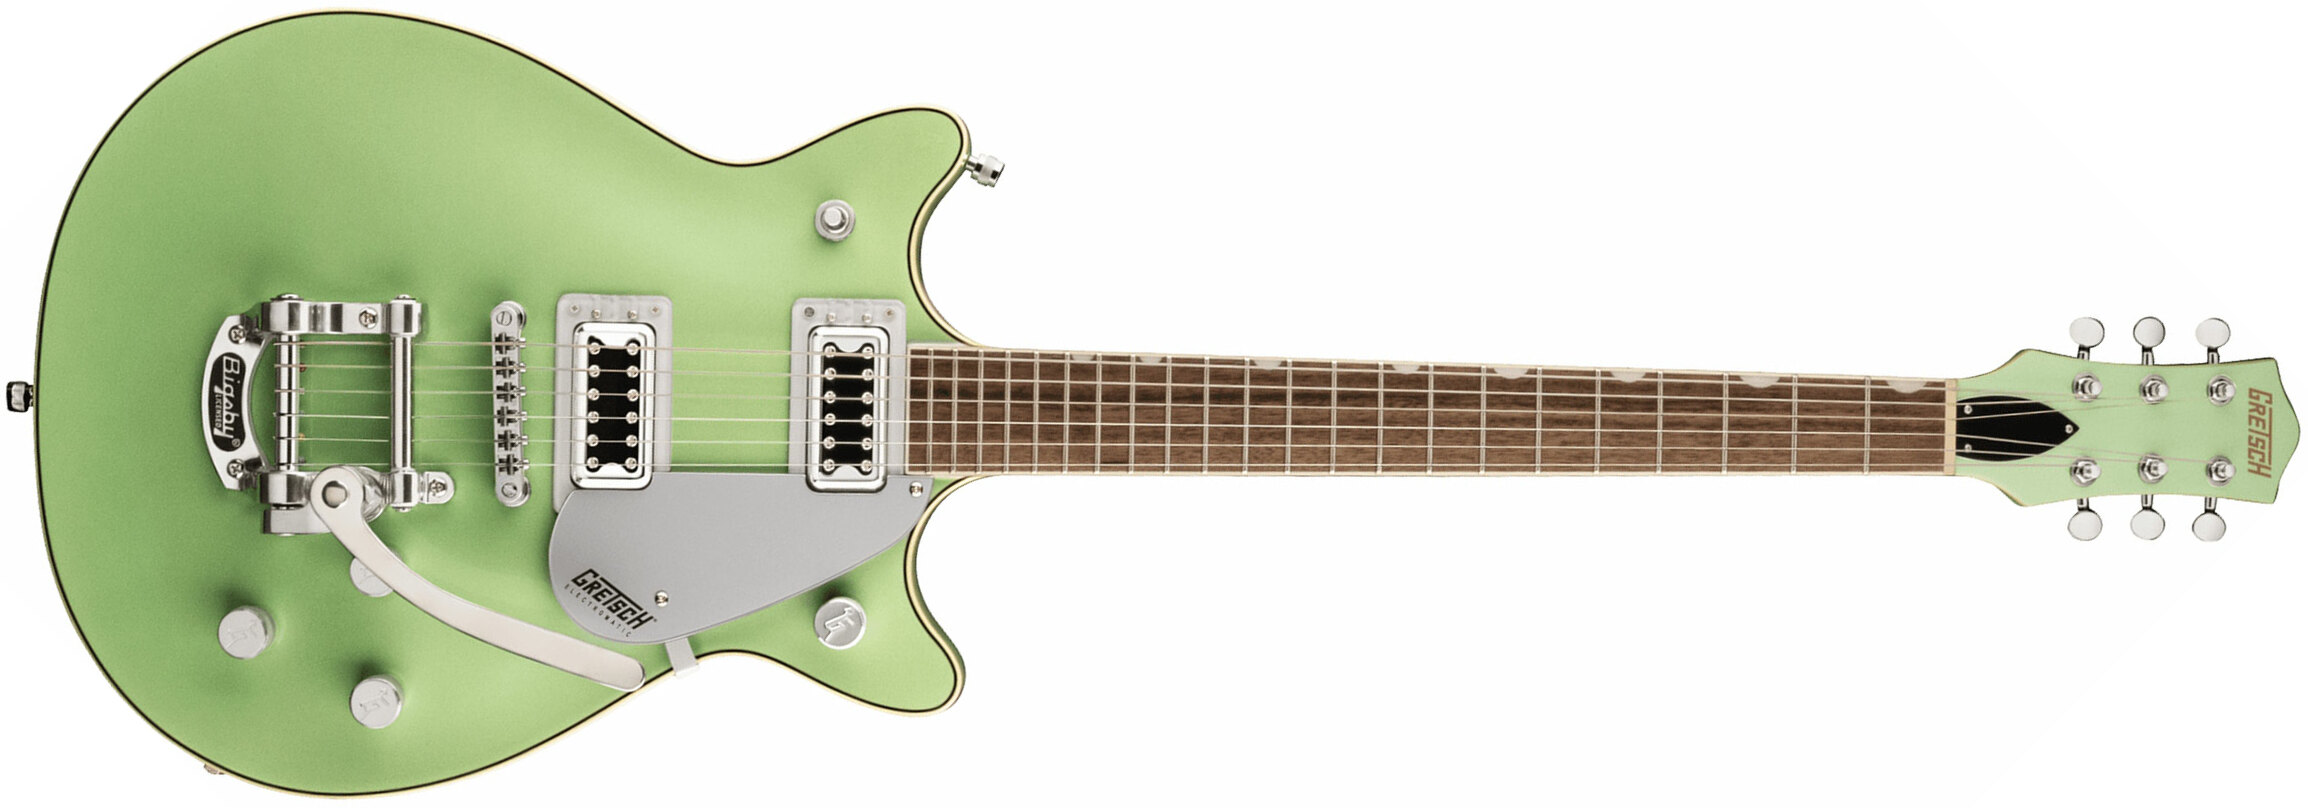 Gretsch G5232t Electromatic Double Jet Ft Hh Bigsby Lau - Broadway Jade - Double cut electric guitar - Main picture